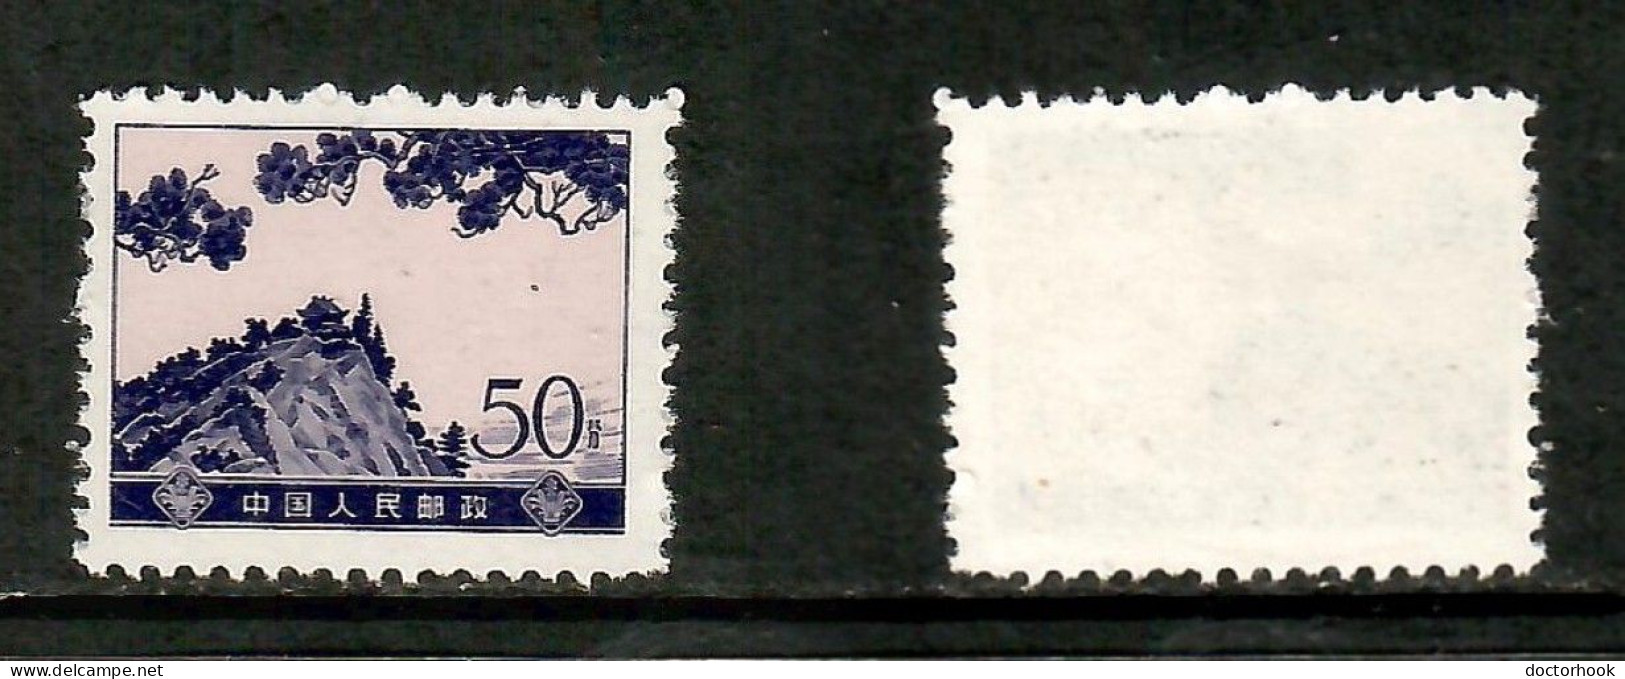 PEOPLES REPUBLIC Of CHINA   Scott # 1035* MINT NO GUM AS ISSUED (CONDITION AS PER SCAN) (Stamp Scan # 1012-11) - Neufs